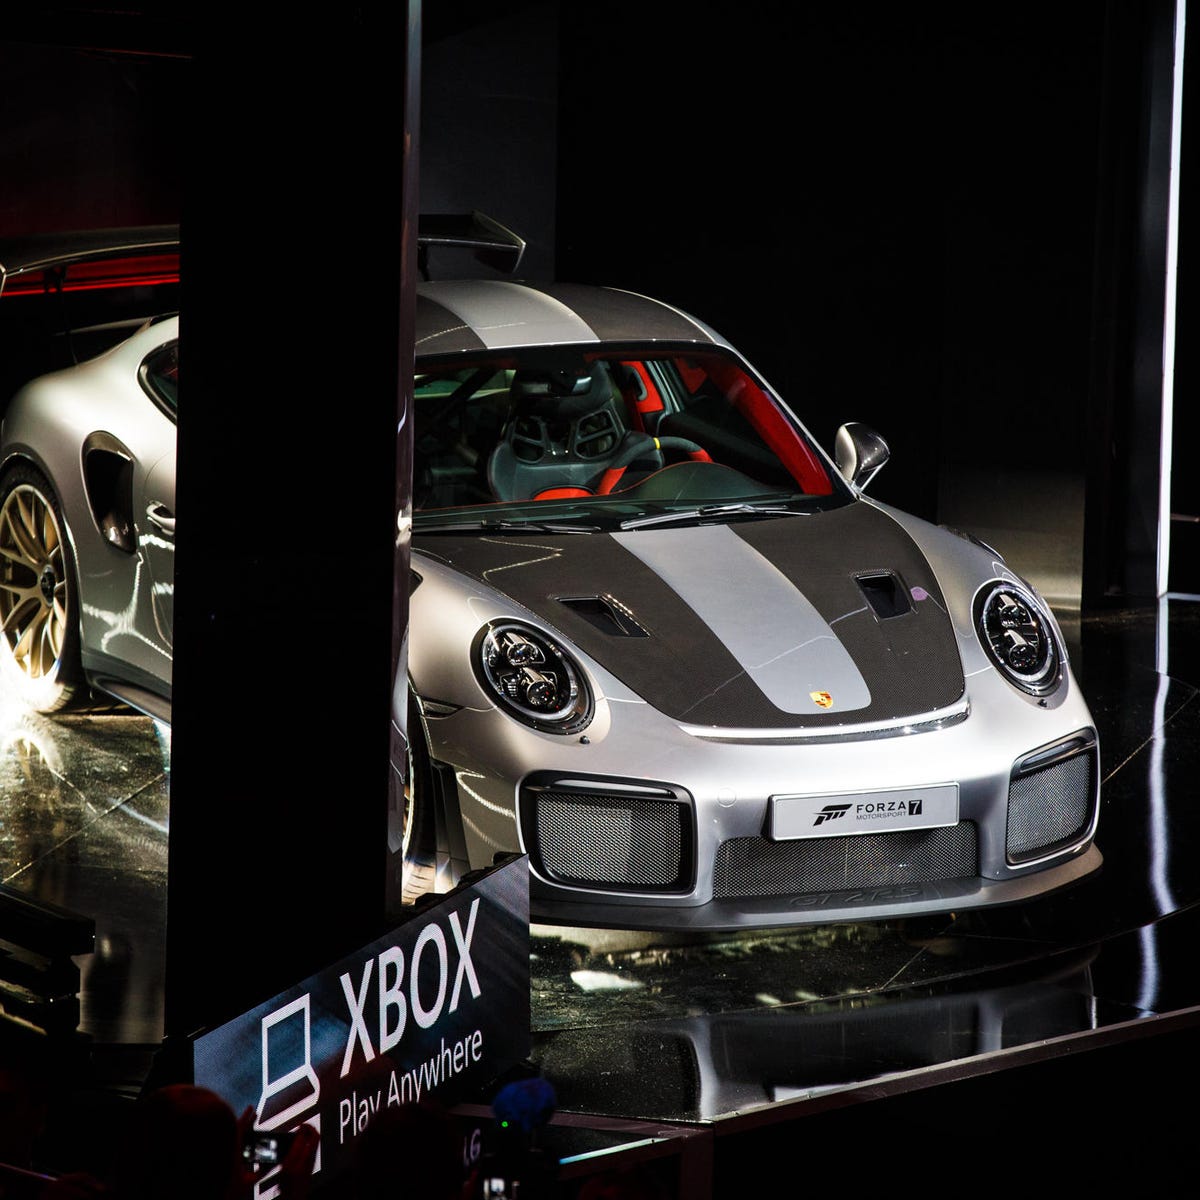 2018 Porsche 911 GT2 RS unveiled as Forza Motorsport 7 cover car - CNET